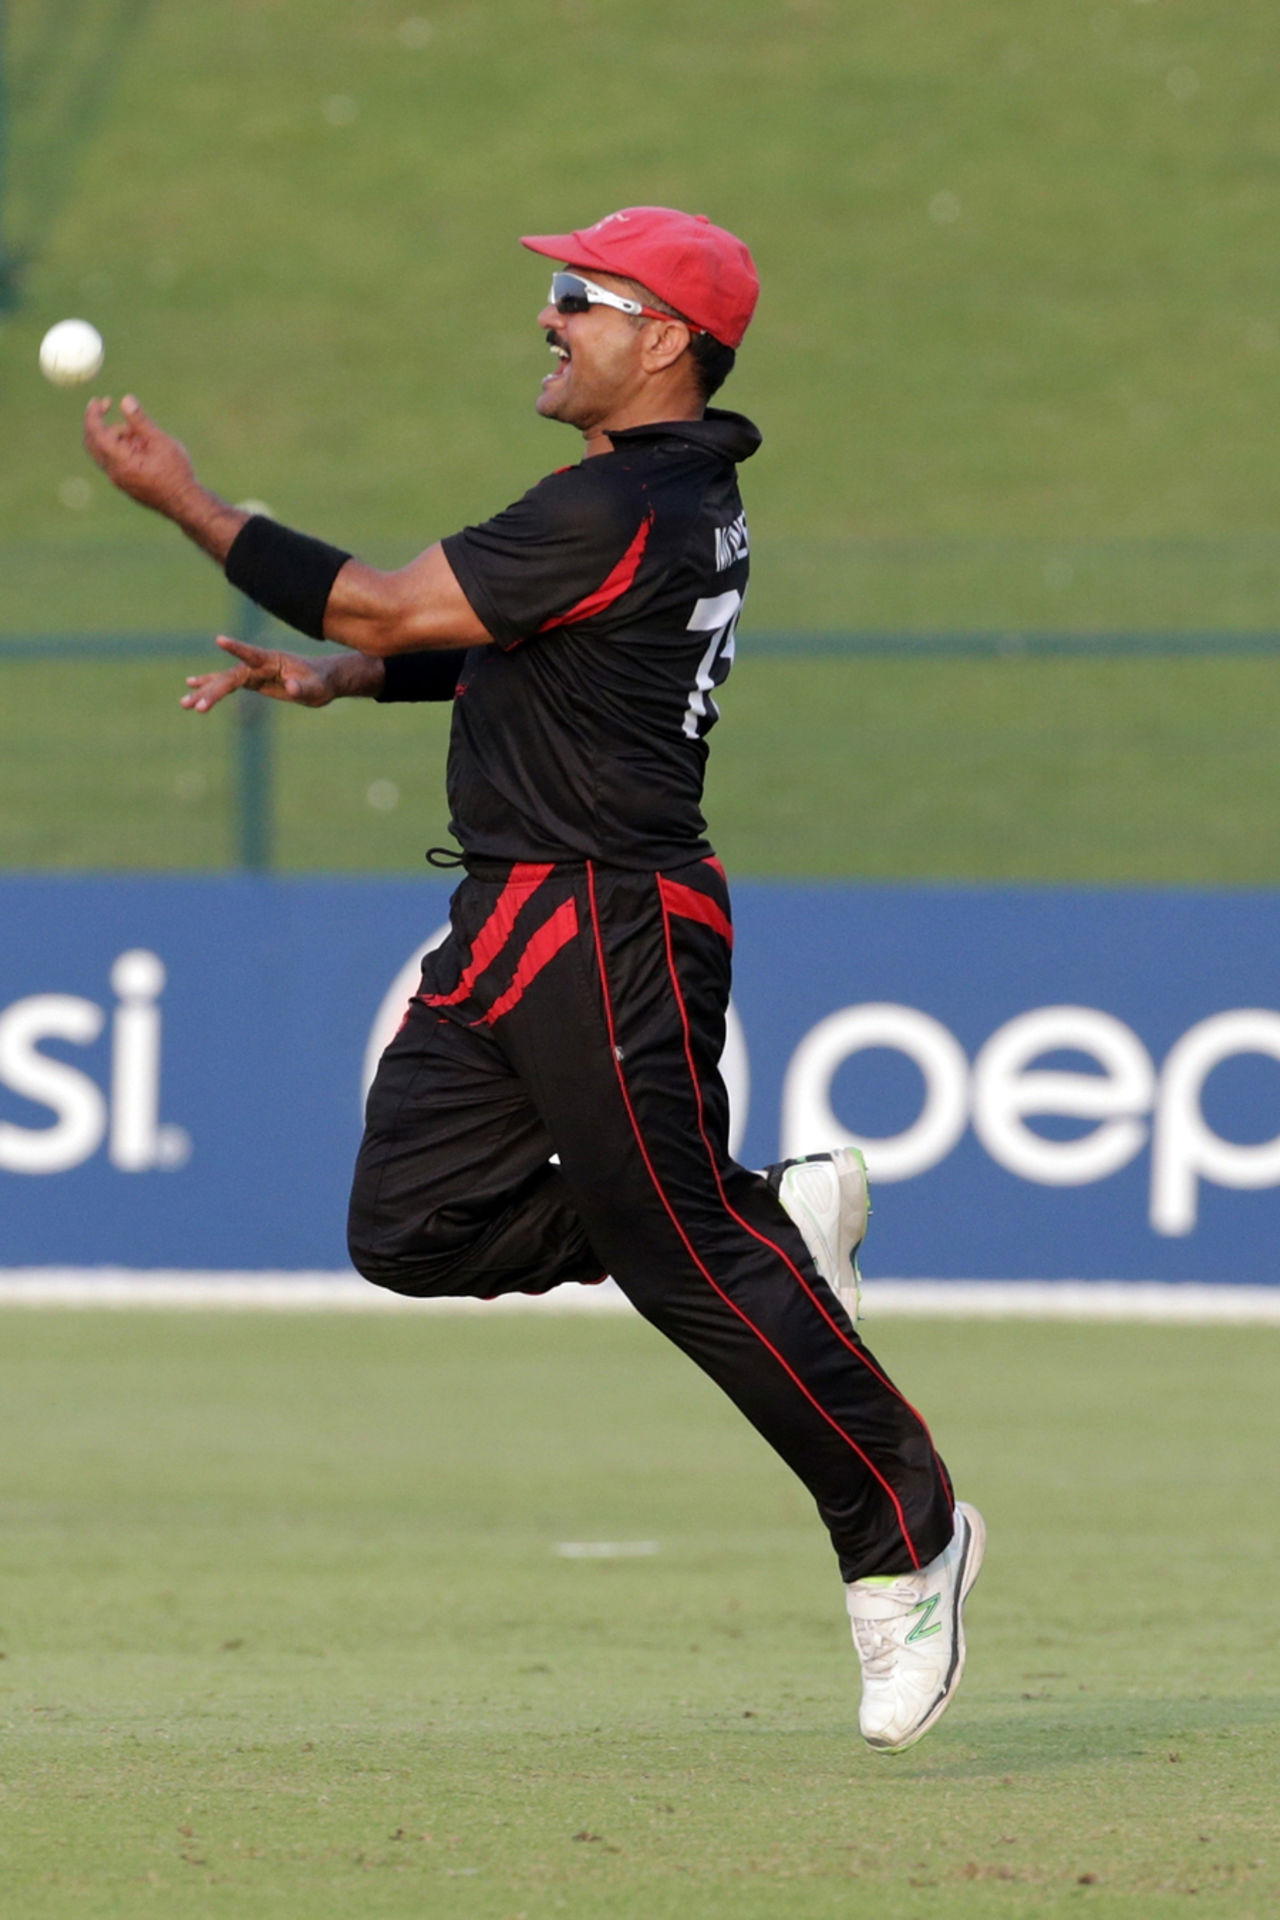 Moner Ahmed of Hong Kong celebrates a catch during the Hong Kong v UAE match at the ICC World Twenty20 Qualifiers at the Zayed Cricket Stadium on November 19, 2013 in Abu Dhabi, United Arab Emirates. (Photo by Graham Crouch-IDI/IDI via Getty Images)